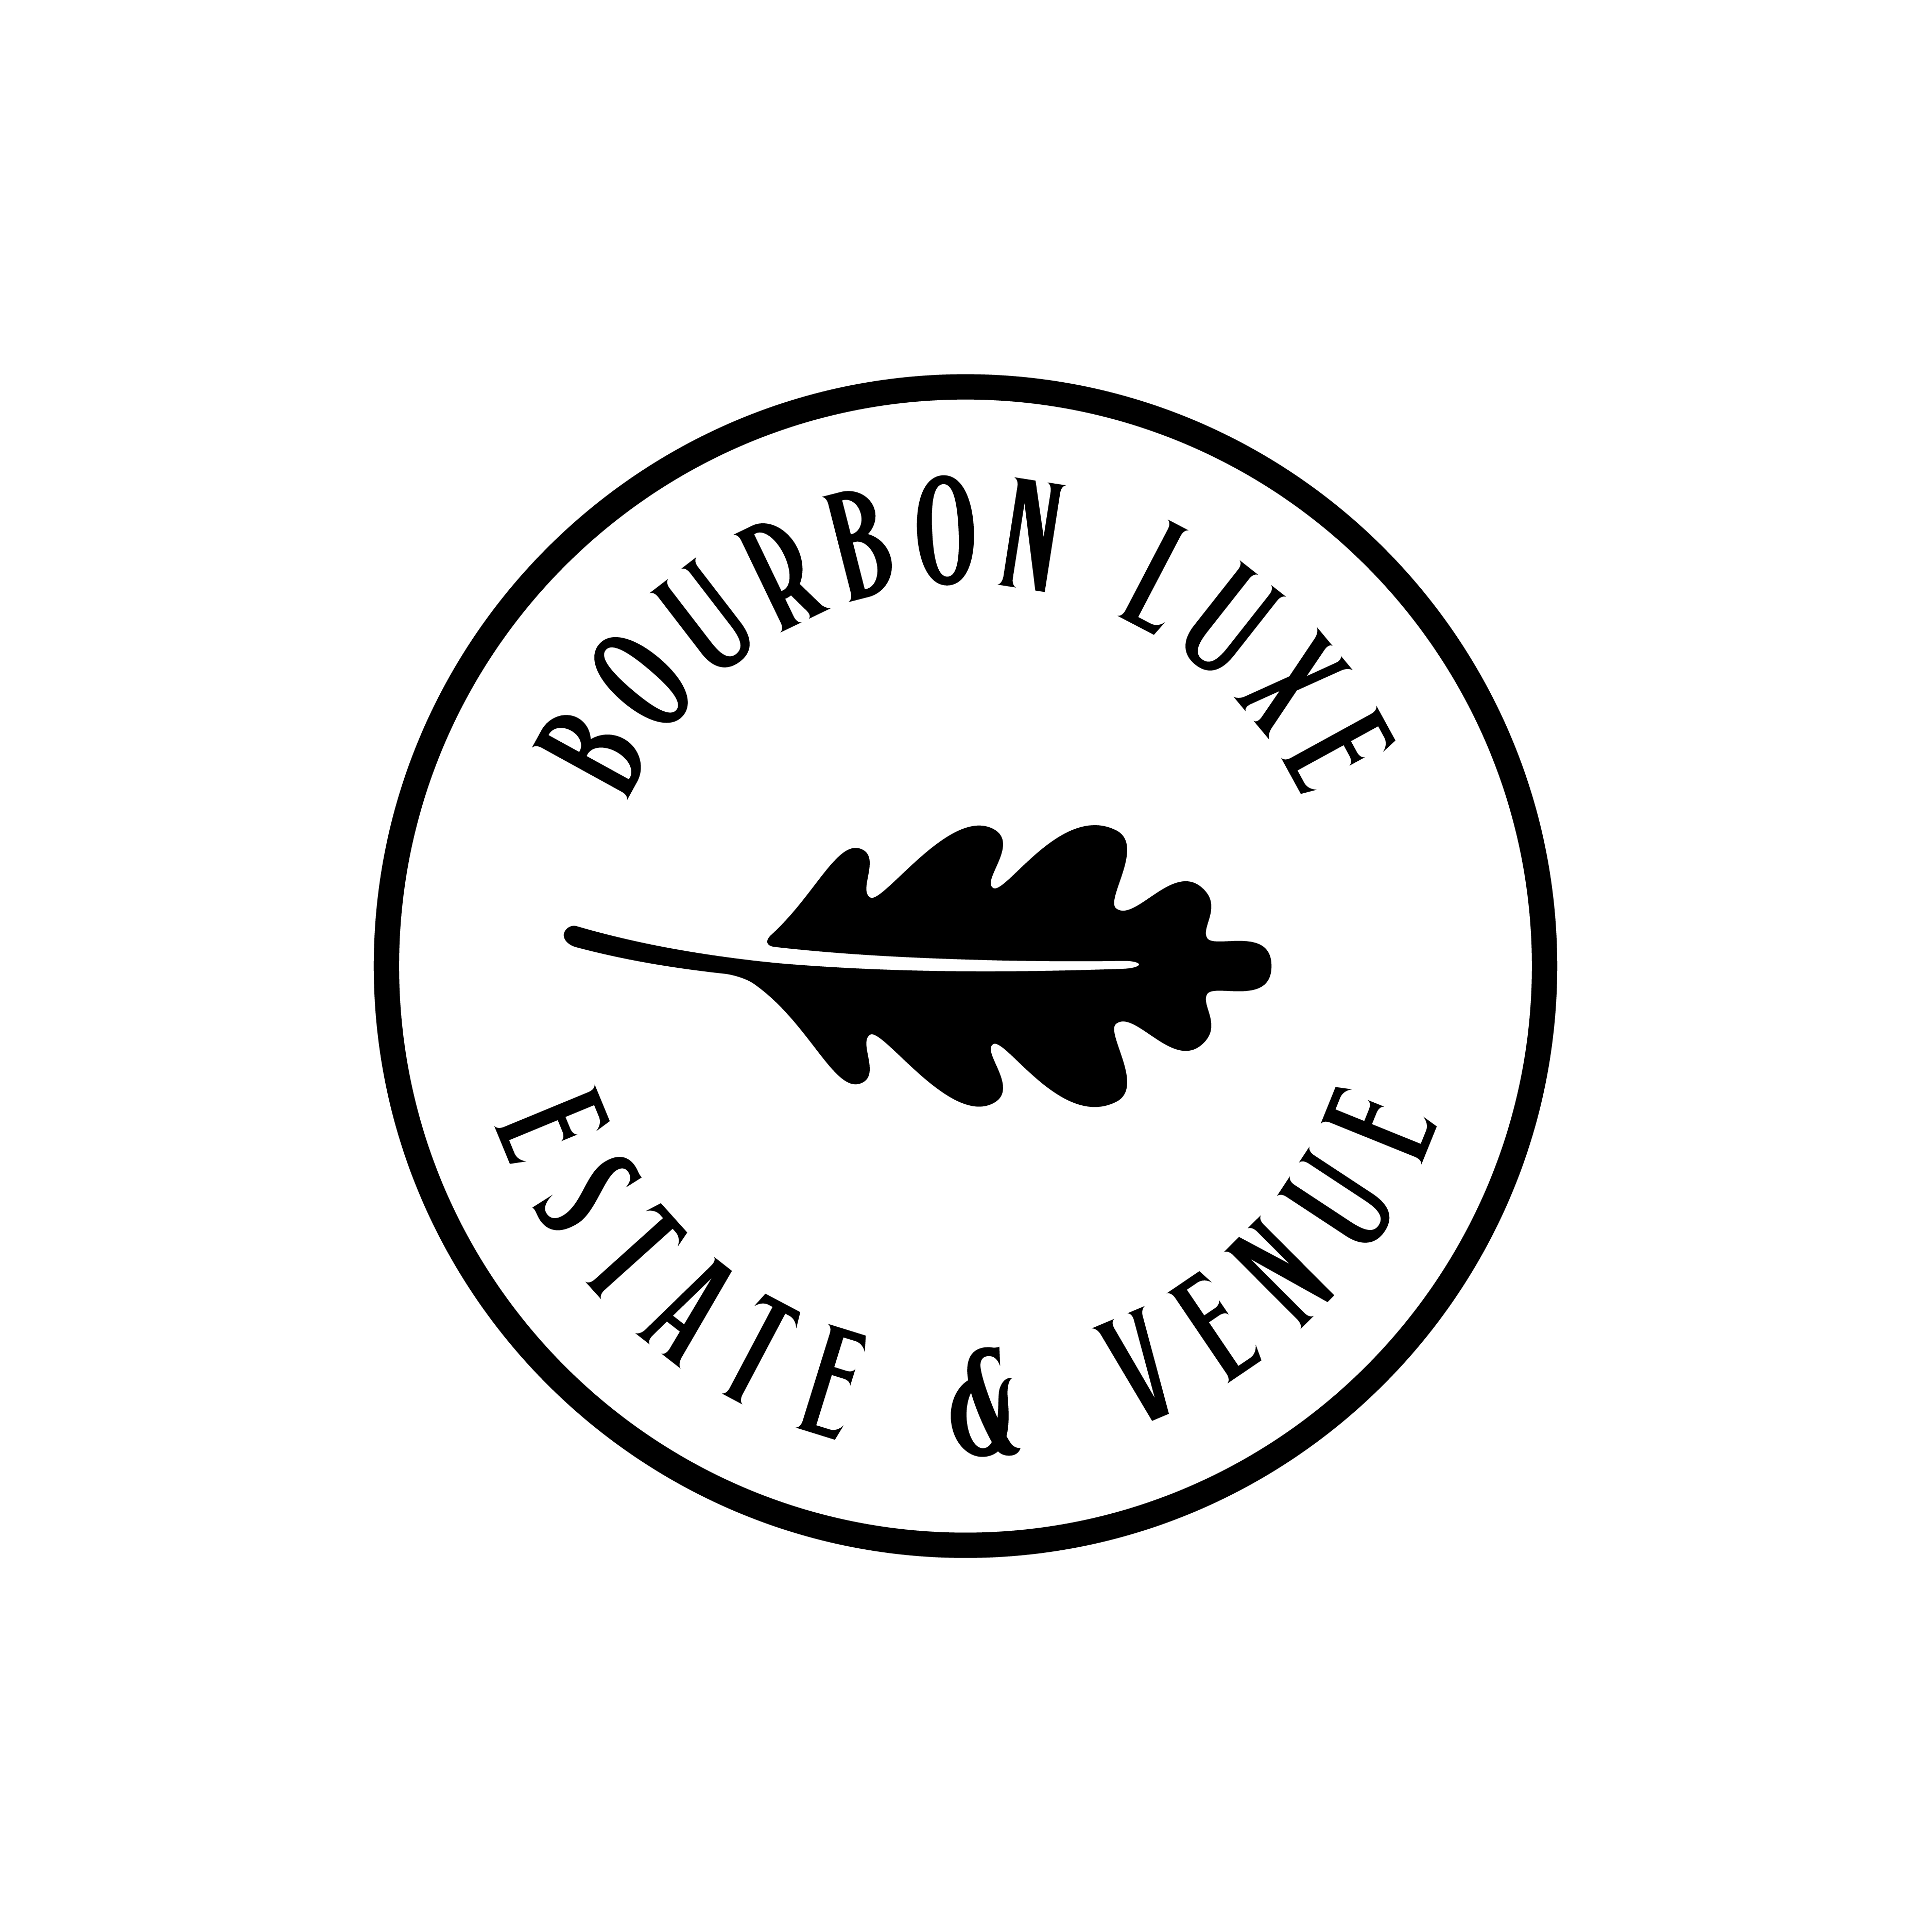 Bourbon Luxe Estate & Venue (Badge) logo design by logo designer Decree Design Co for your inspiration and for the worlds largest logo competition